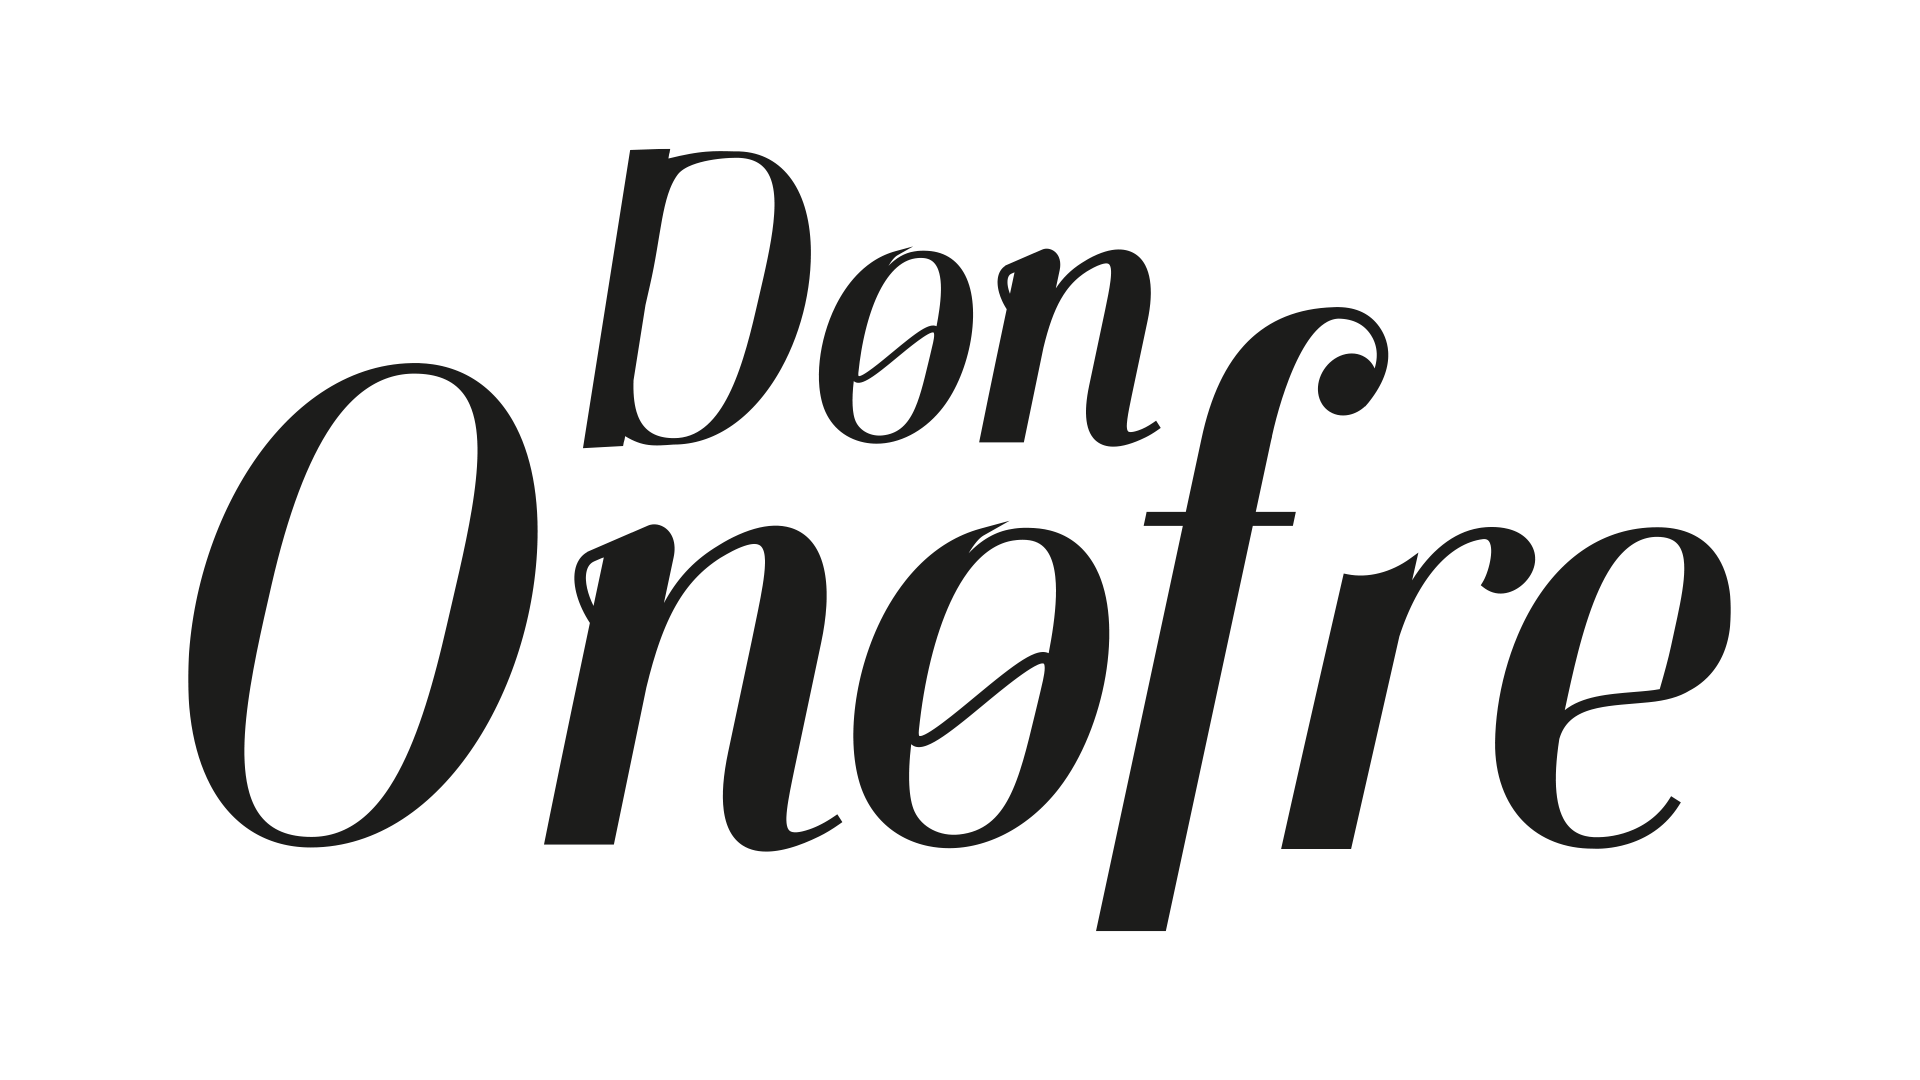 DON ONOFRE